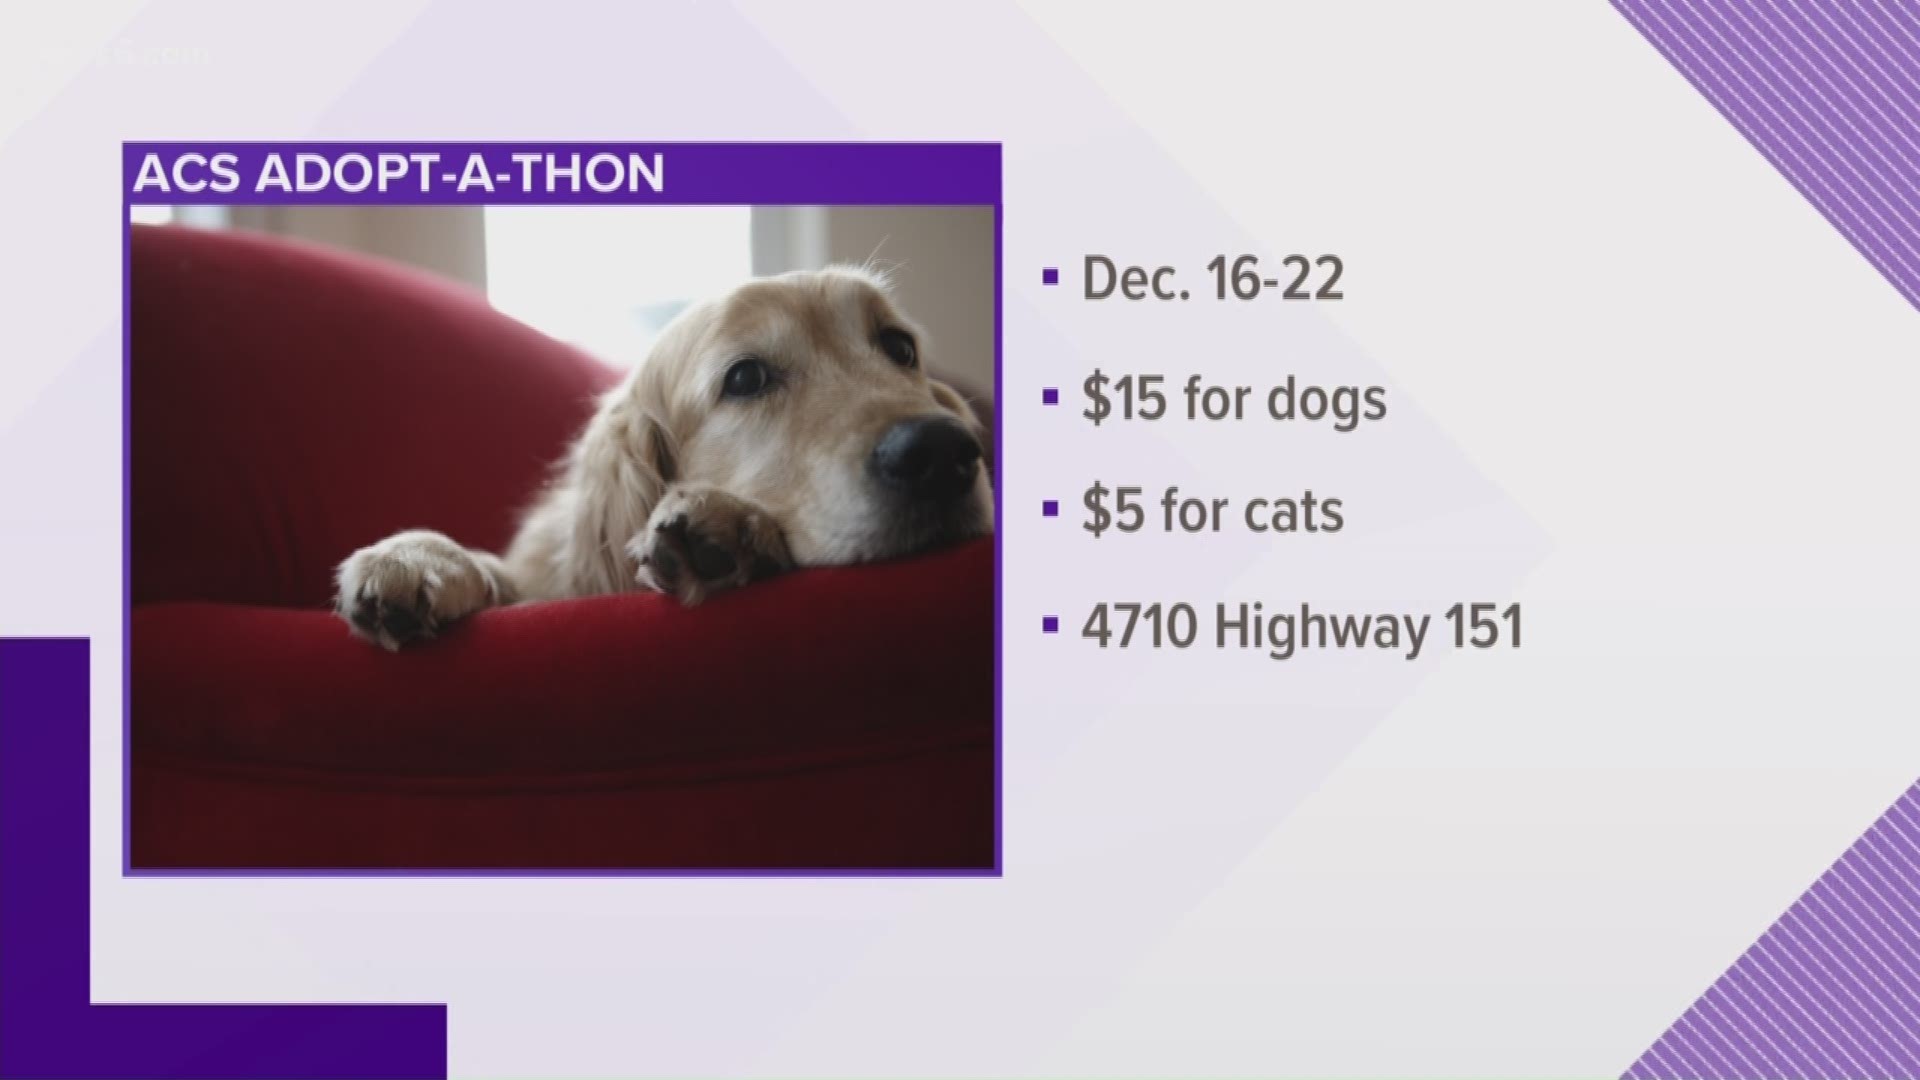 If you are looking to add to your family this holiday season, Animal Care Services is offering an adoption special starting Monday.